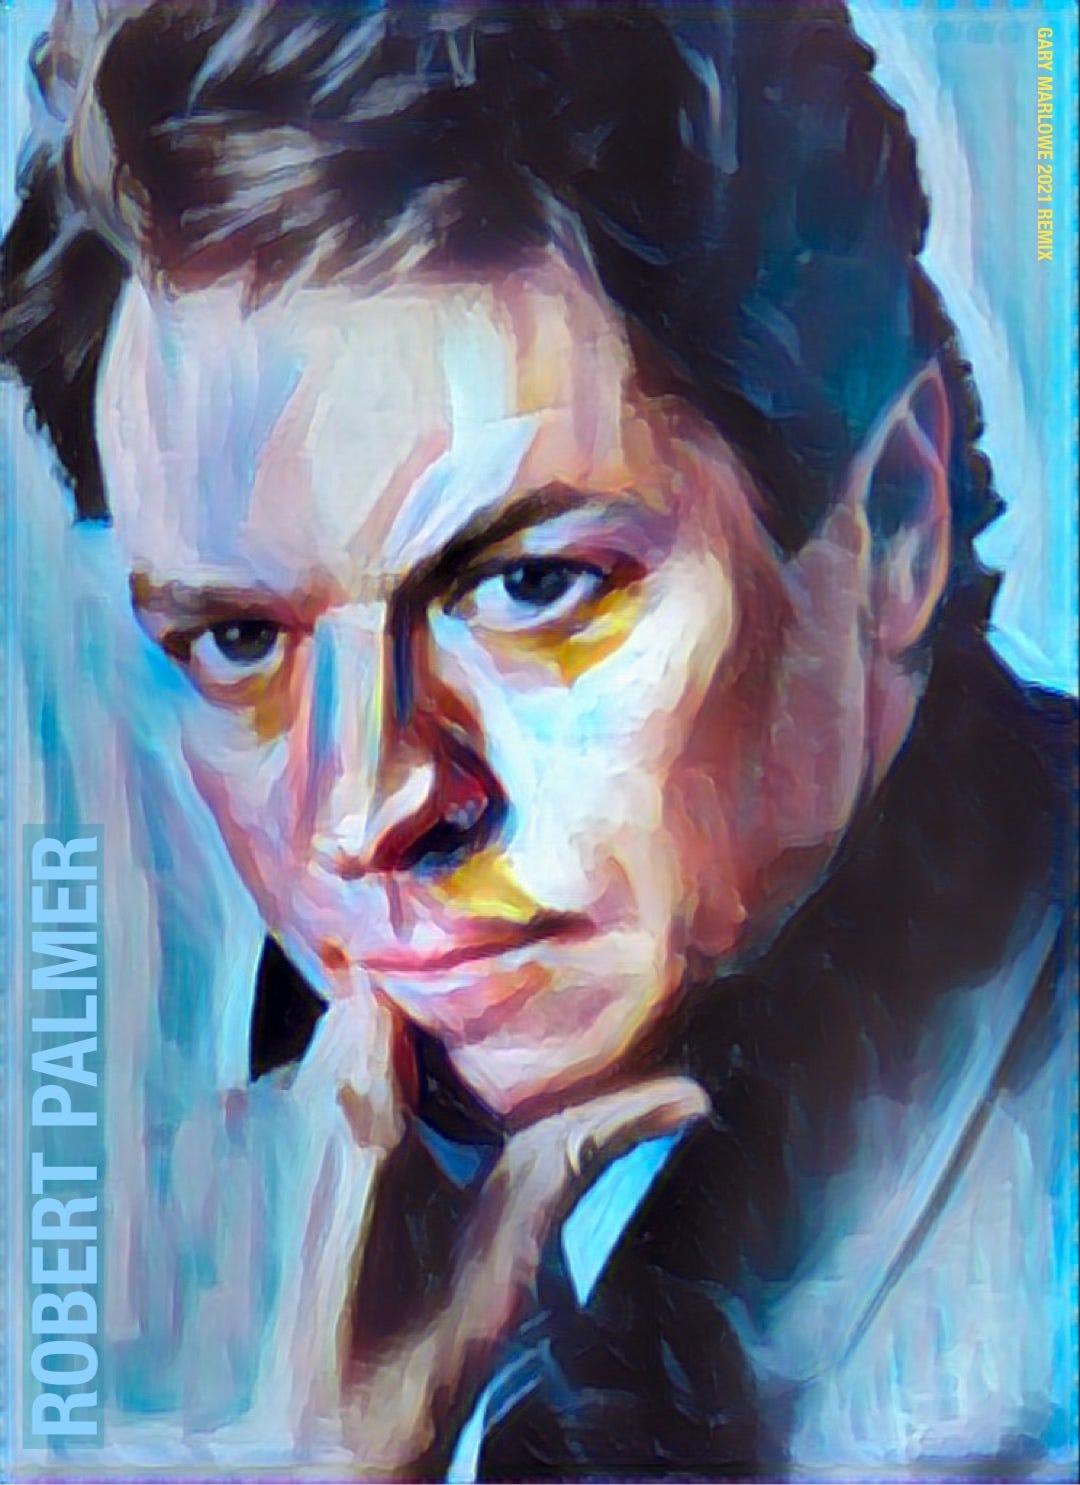 Simply Irresistible: The life and times of Robert Palmer | by Gary Marlowe  | Medium